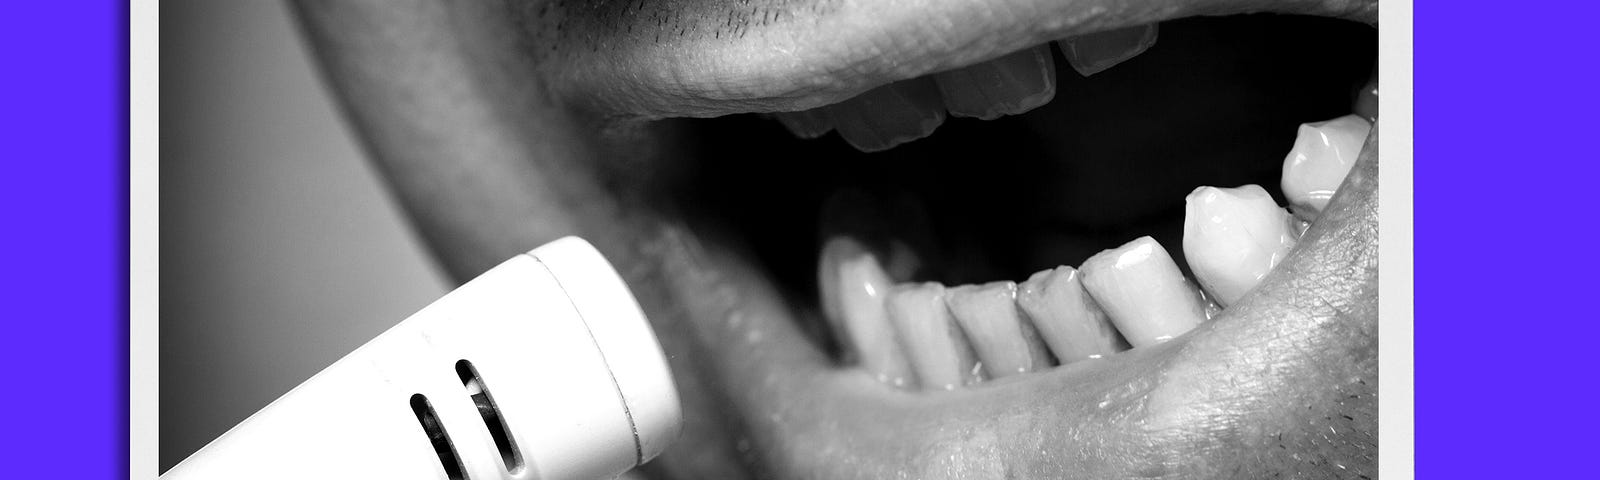 Purple, black, and white photo illustration of a close-up of a man’s mouth speaking into a mic.